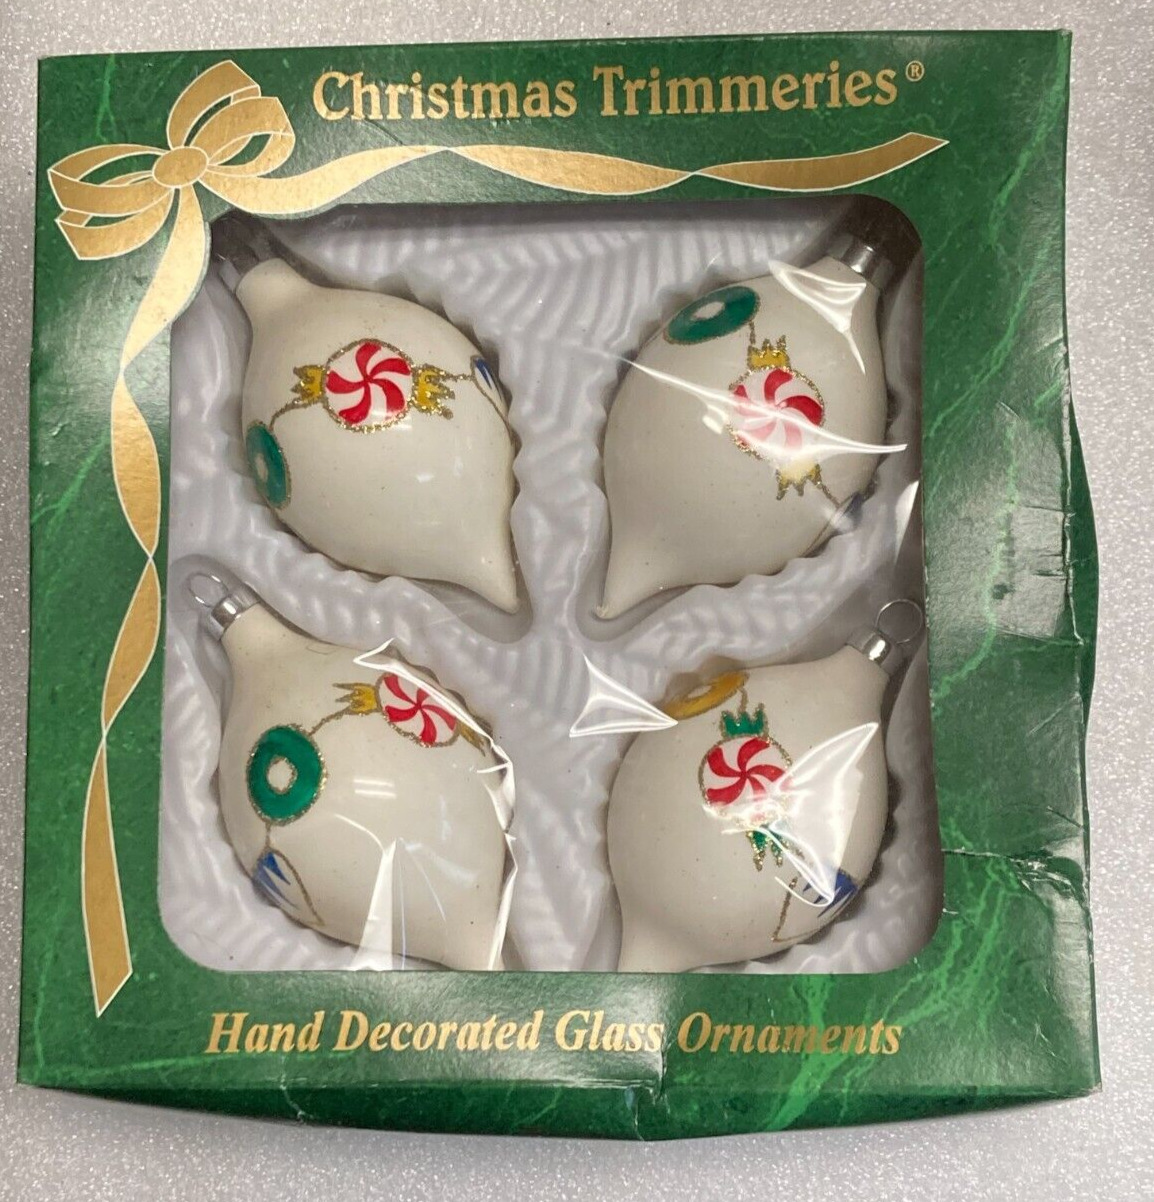 4 Vnt Christmas Trimmeries Ornaments Peppermint Candies Hand Decorated Glass